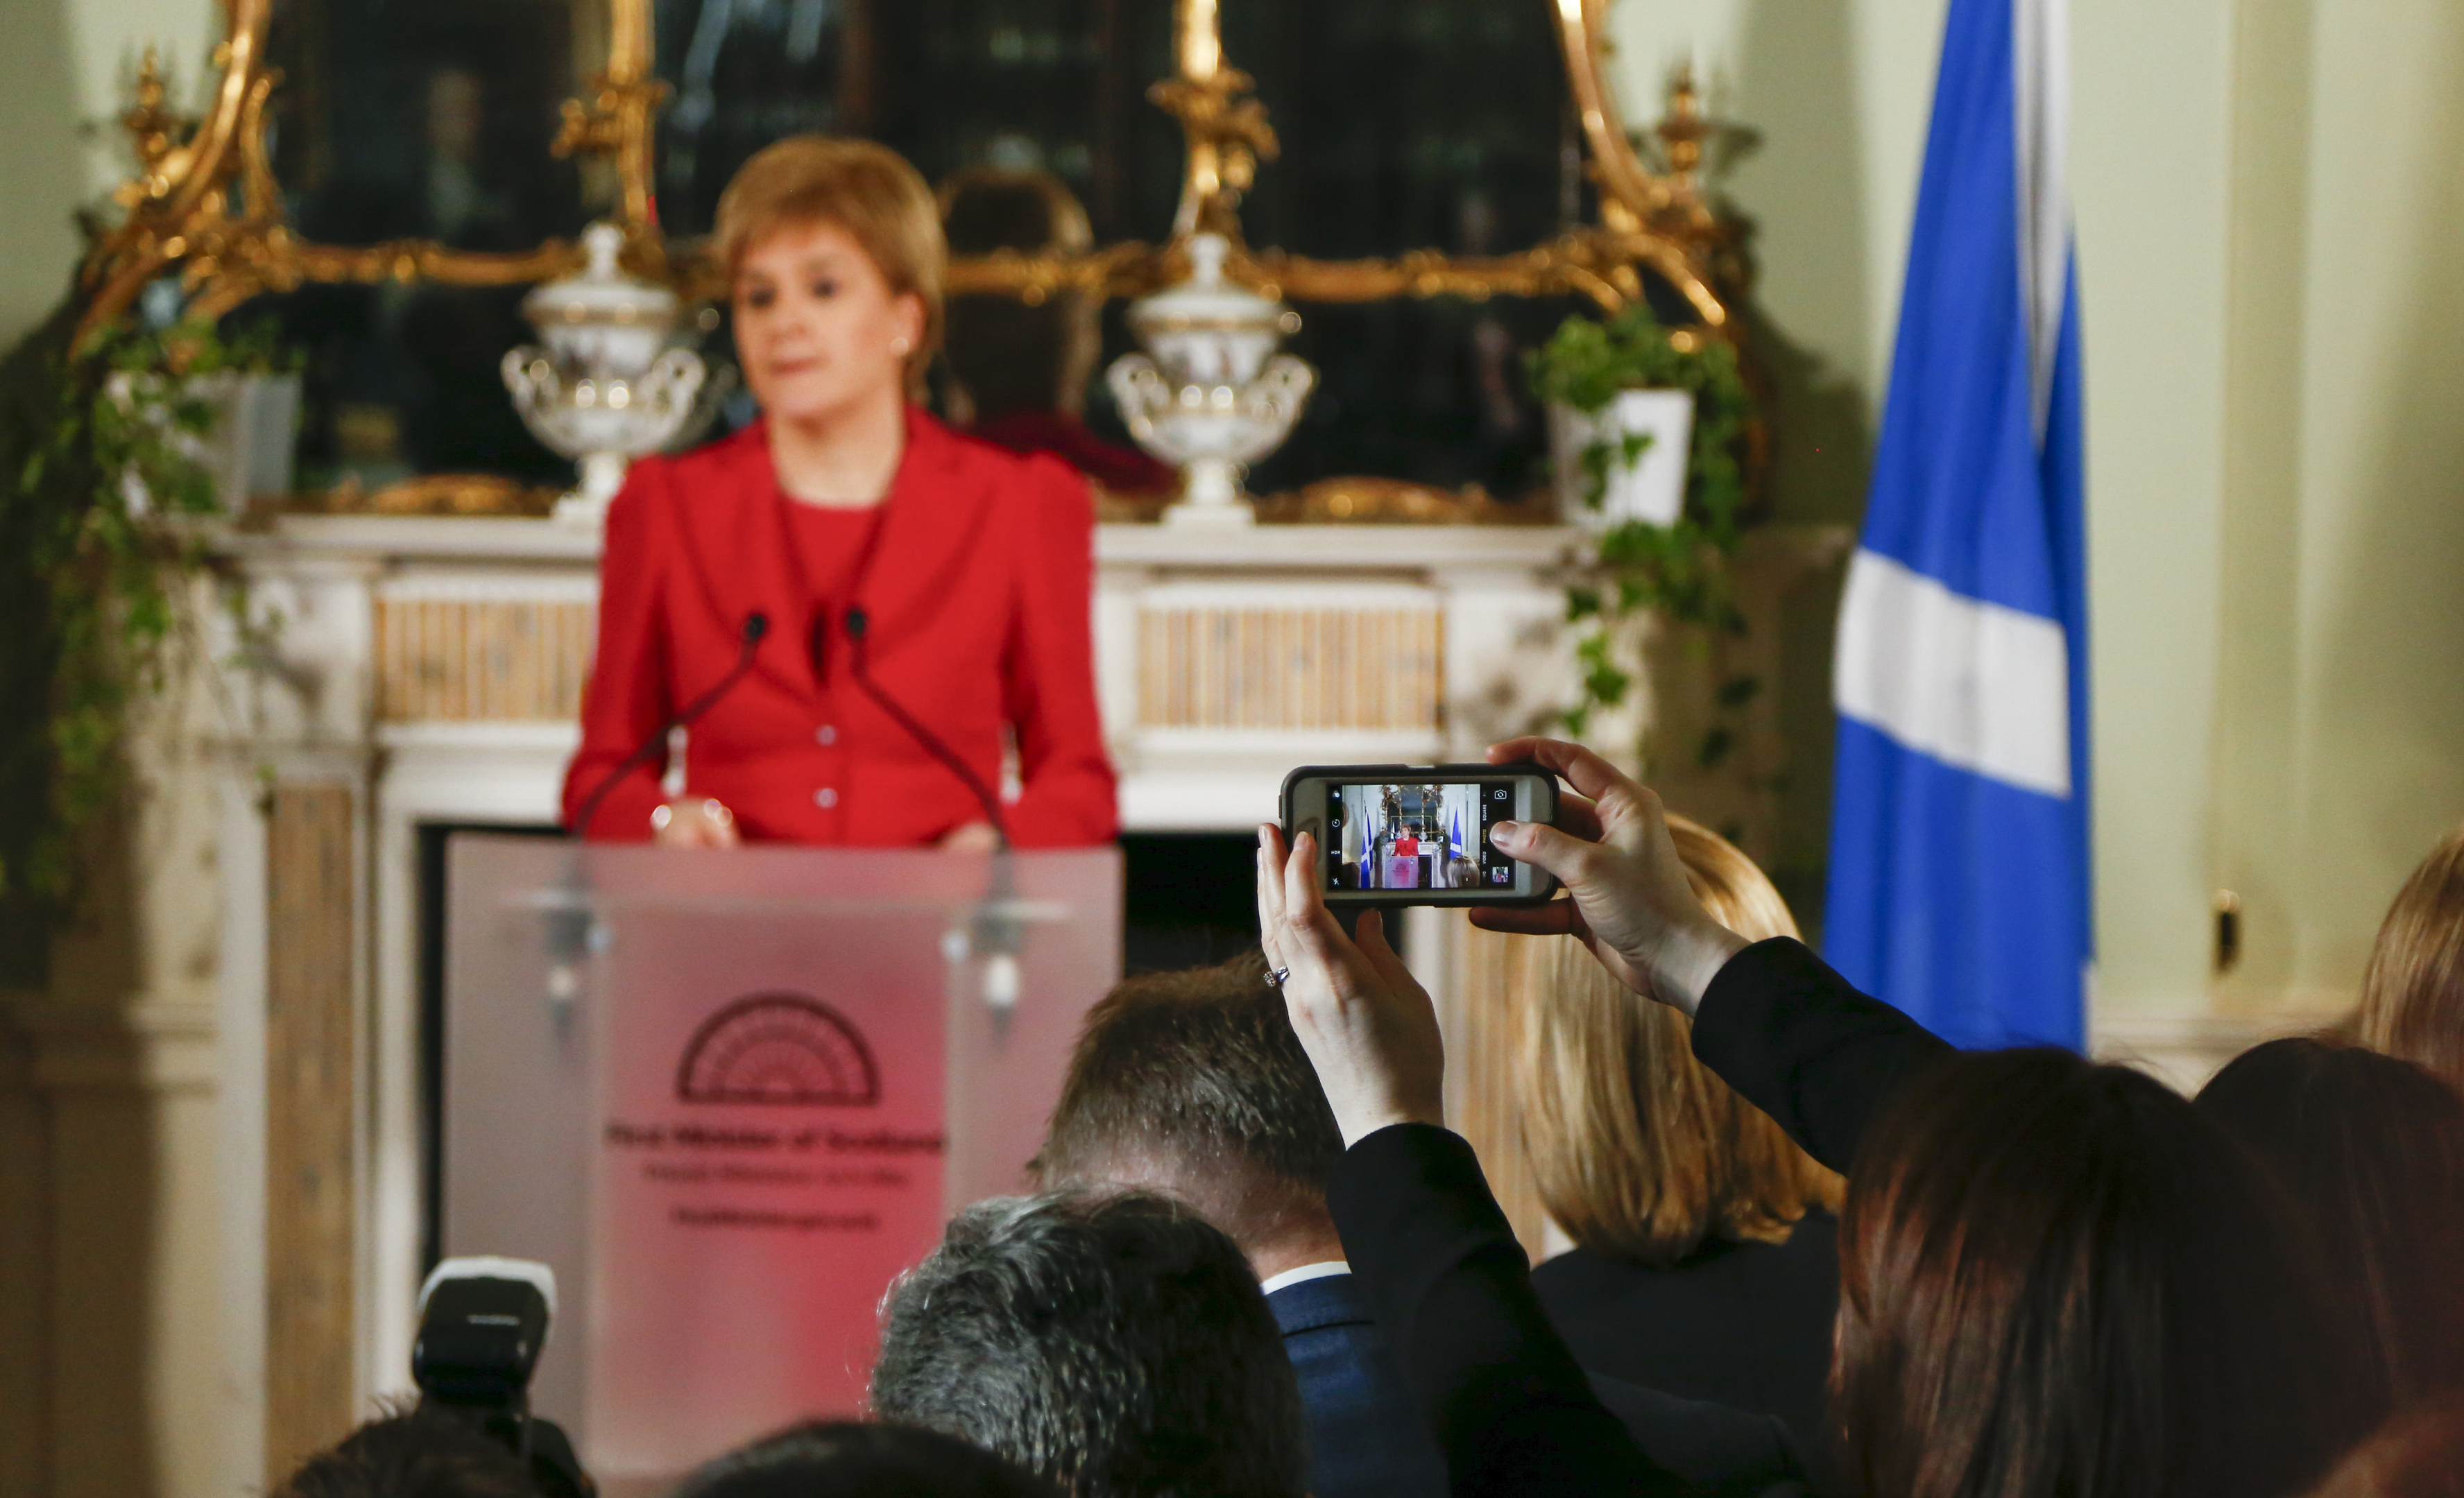 Nicola Sturgeon has upped the stakes in the most dramatic way.